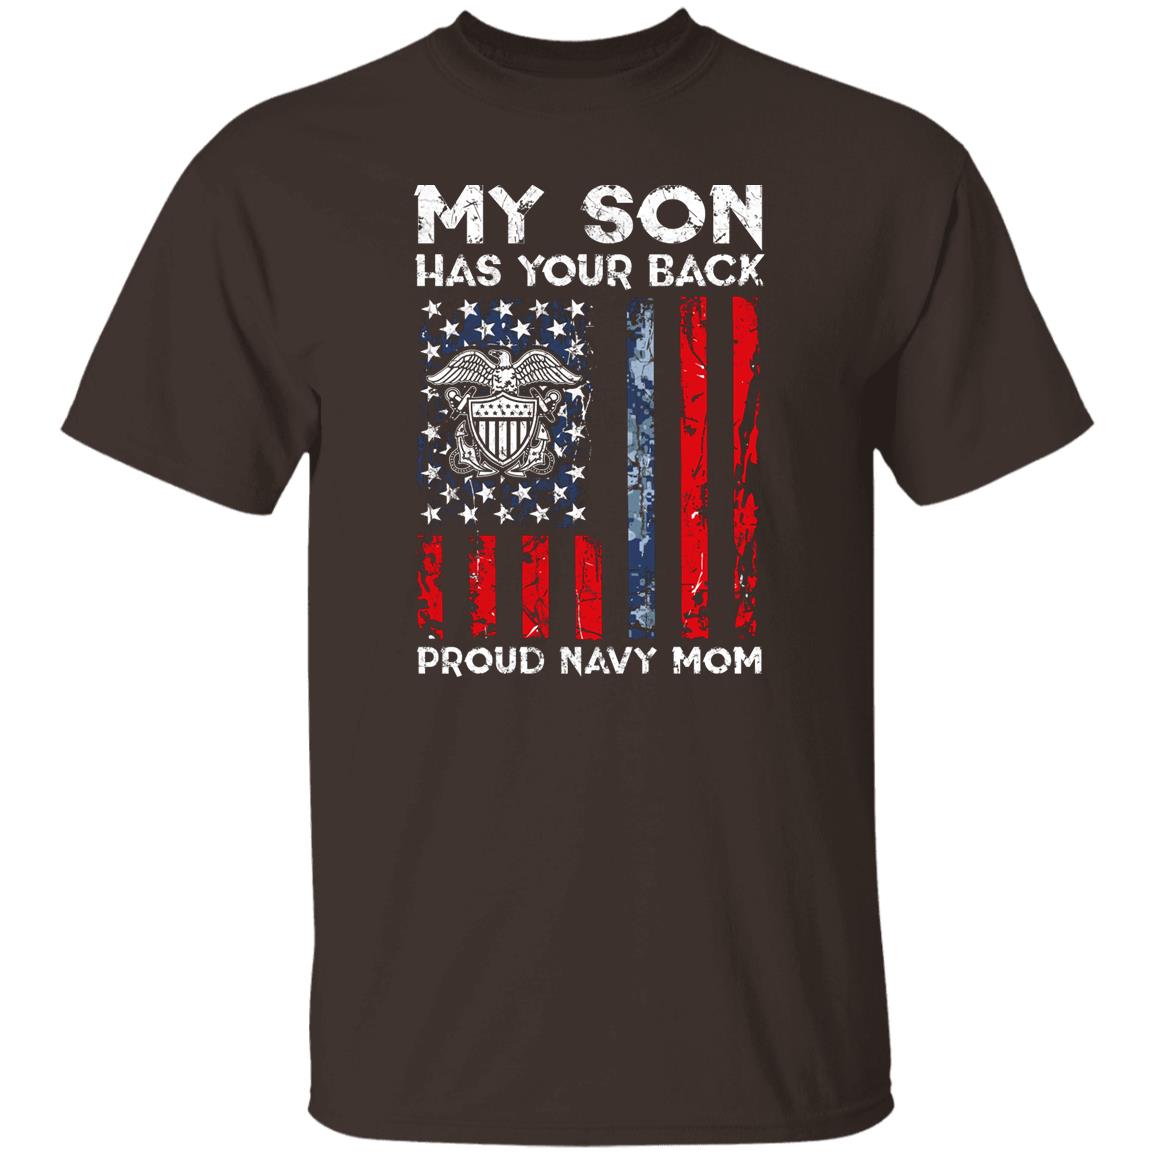 My Son Has Your Back - Proud Navy Mom G500 5.3 oz. T-Shirt